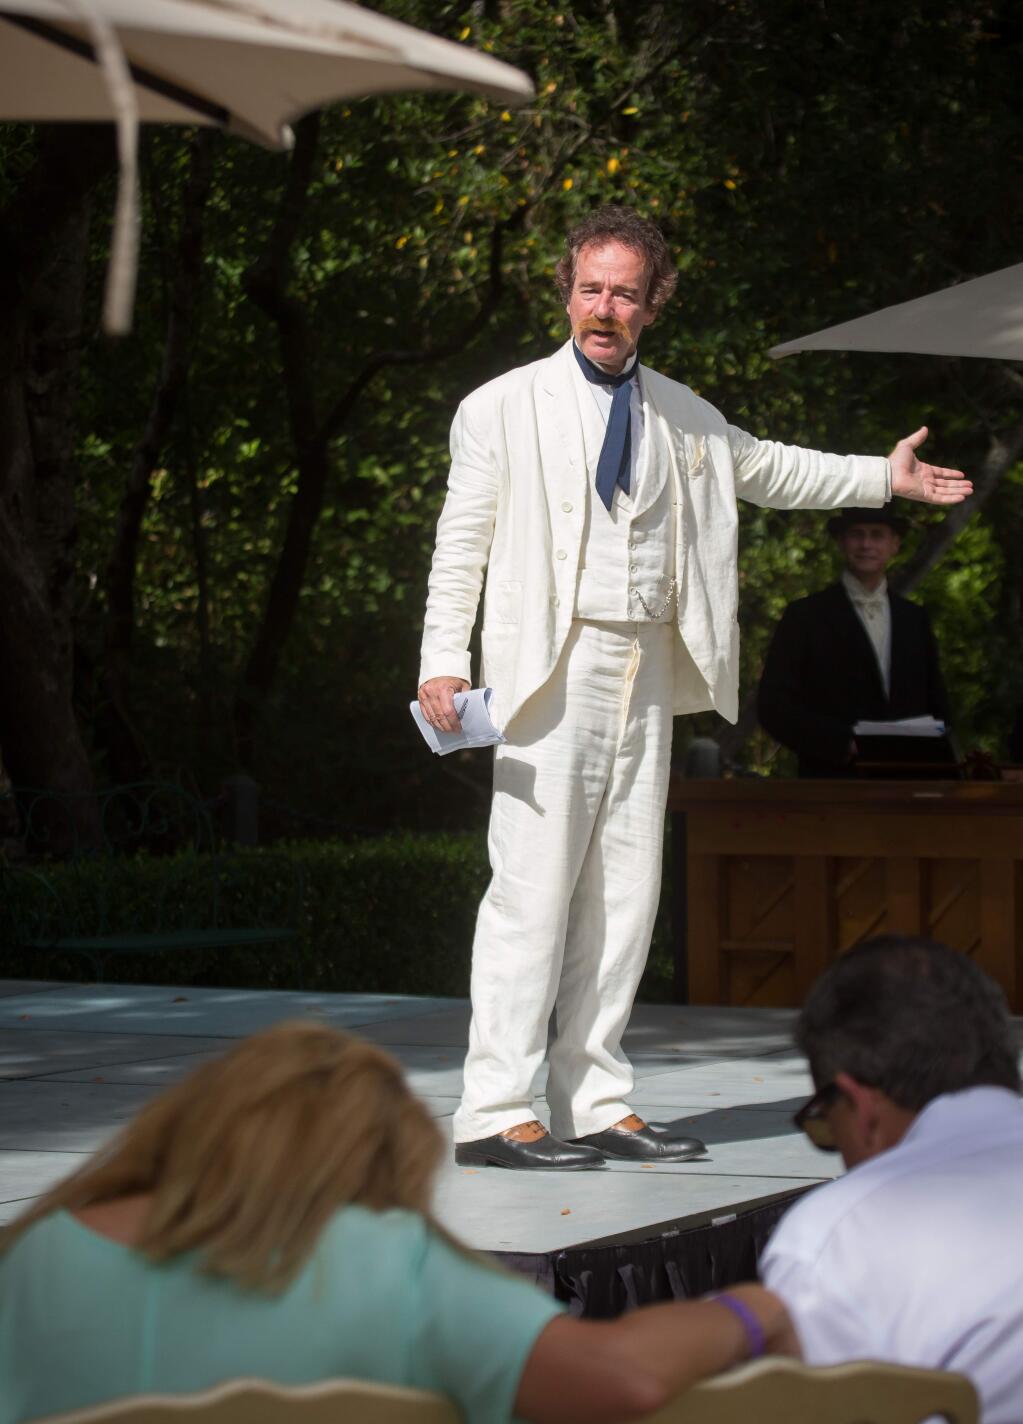 Jefferey Weissman portrays Mark Twain during a living history faire at Buena Vista Winery in Sonoma Calif. Saturday, July 15, 2017. Guests were invited to travel back in time to Paris and meet Édouard Manet, Mark Twain, Captain Nemo, and Professor Phineas Flockmocker III among other characters. (Jeremy Portje / For The Press Democrat)